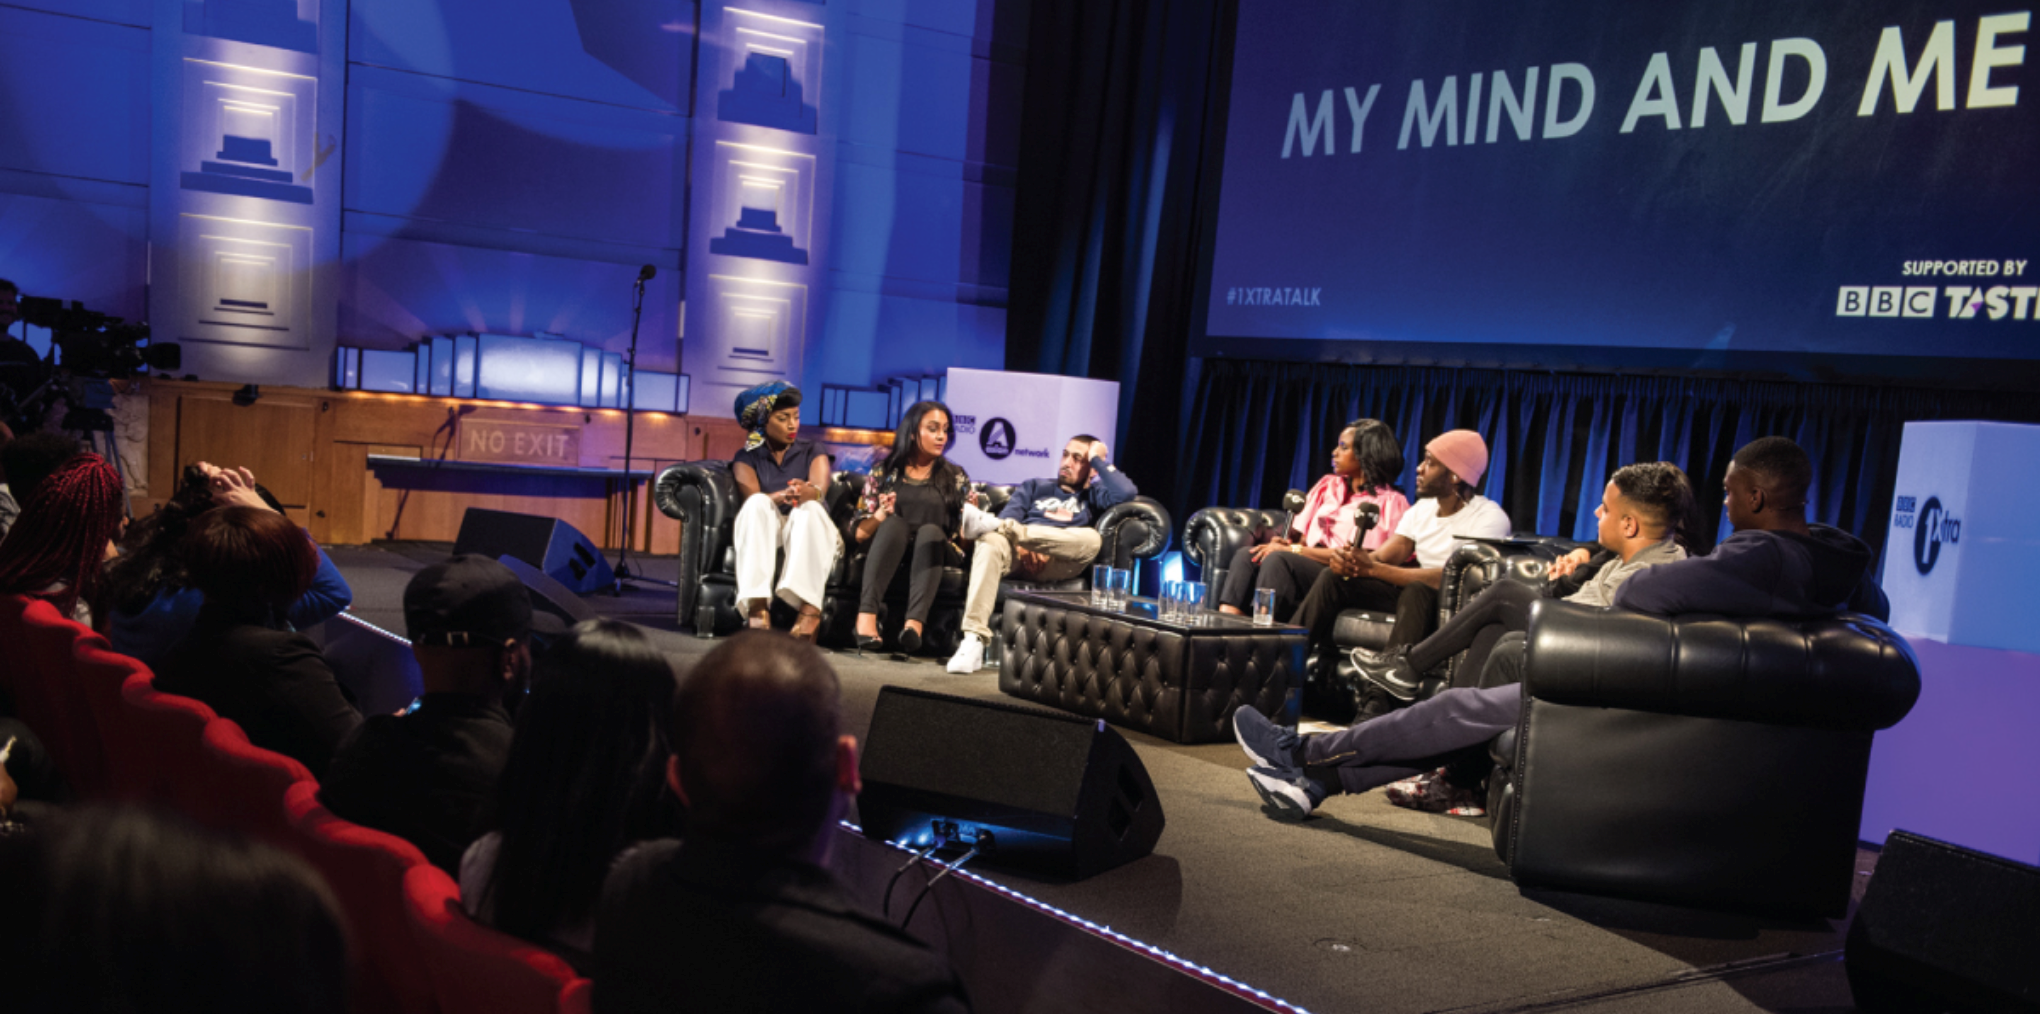 A group of people sitting on sofas on a stage, speaking to the audience and each other